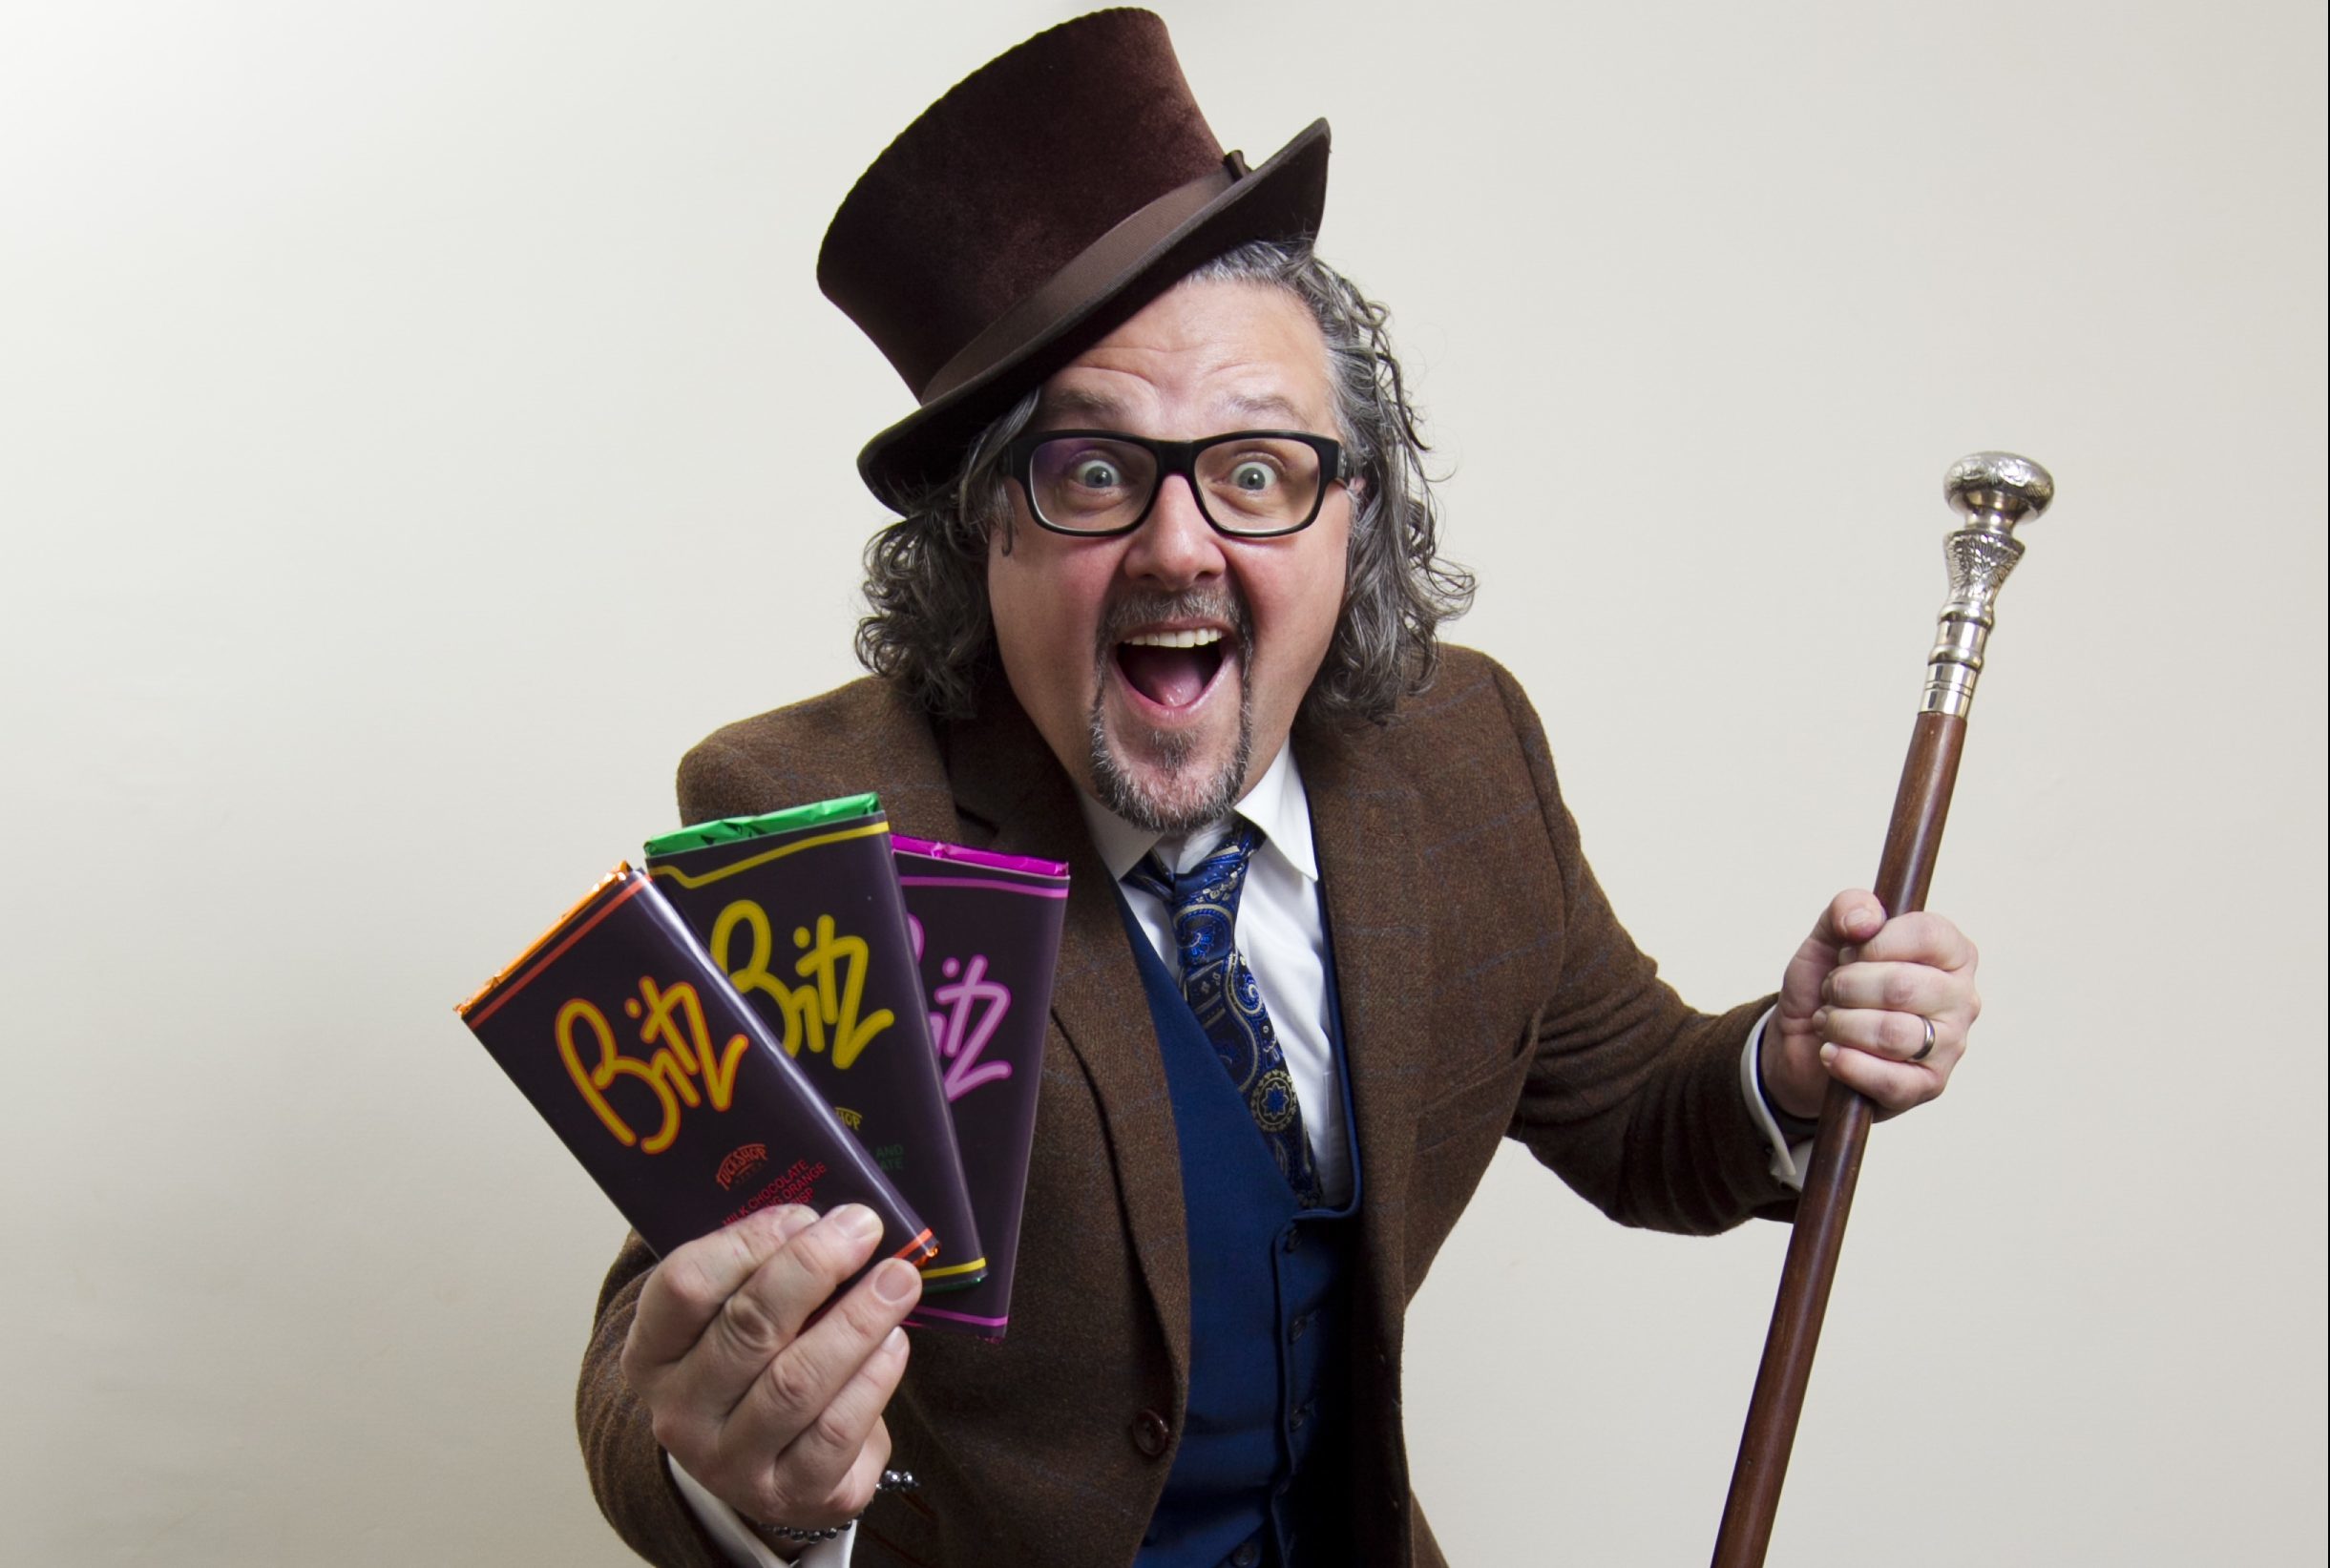 Roddy Nichol (aka Willy Wonka) who makes old retro sweets and chocolate. (Andrew Cawley/Dc Thomson)